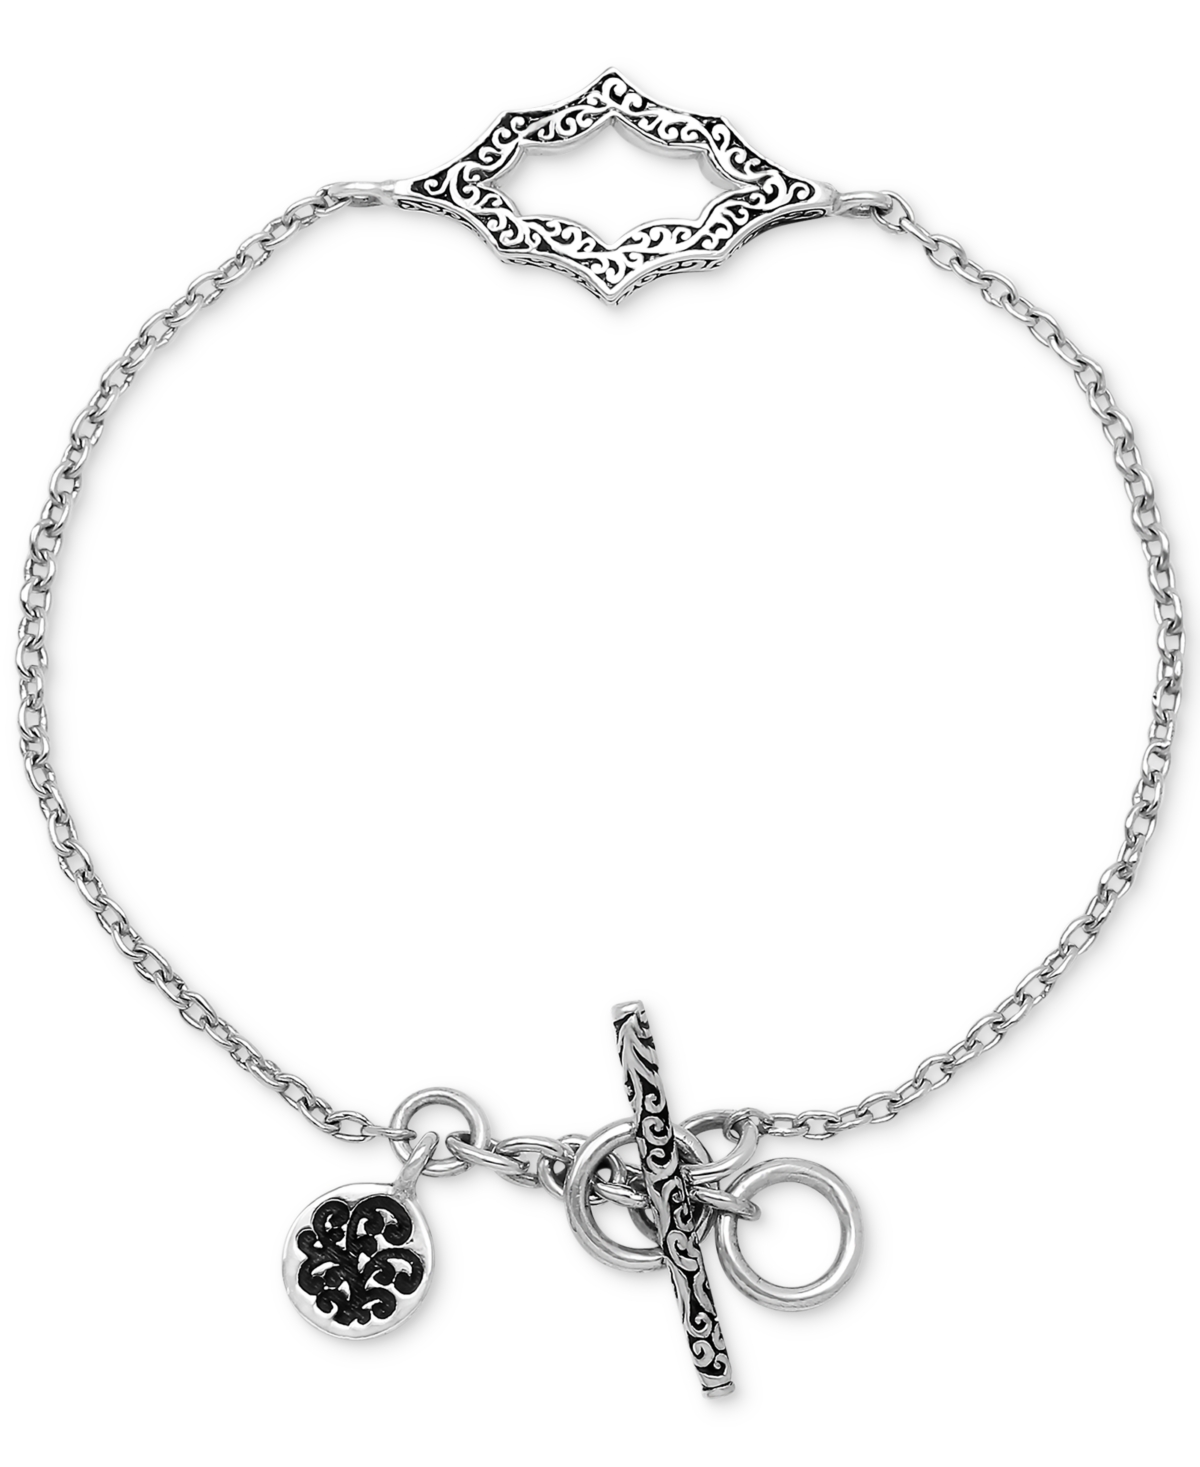 Filigree Cut-Out Toggle Bracelet in Sterling Silver - Silver